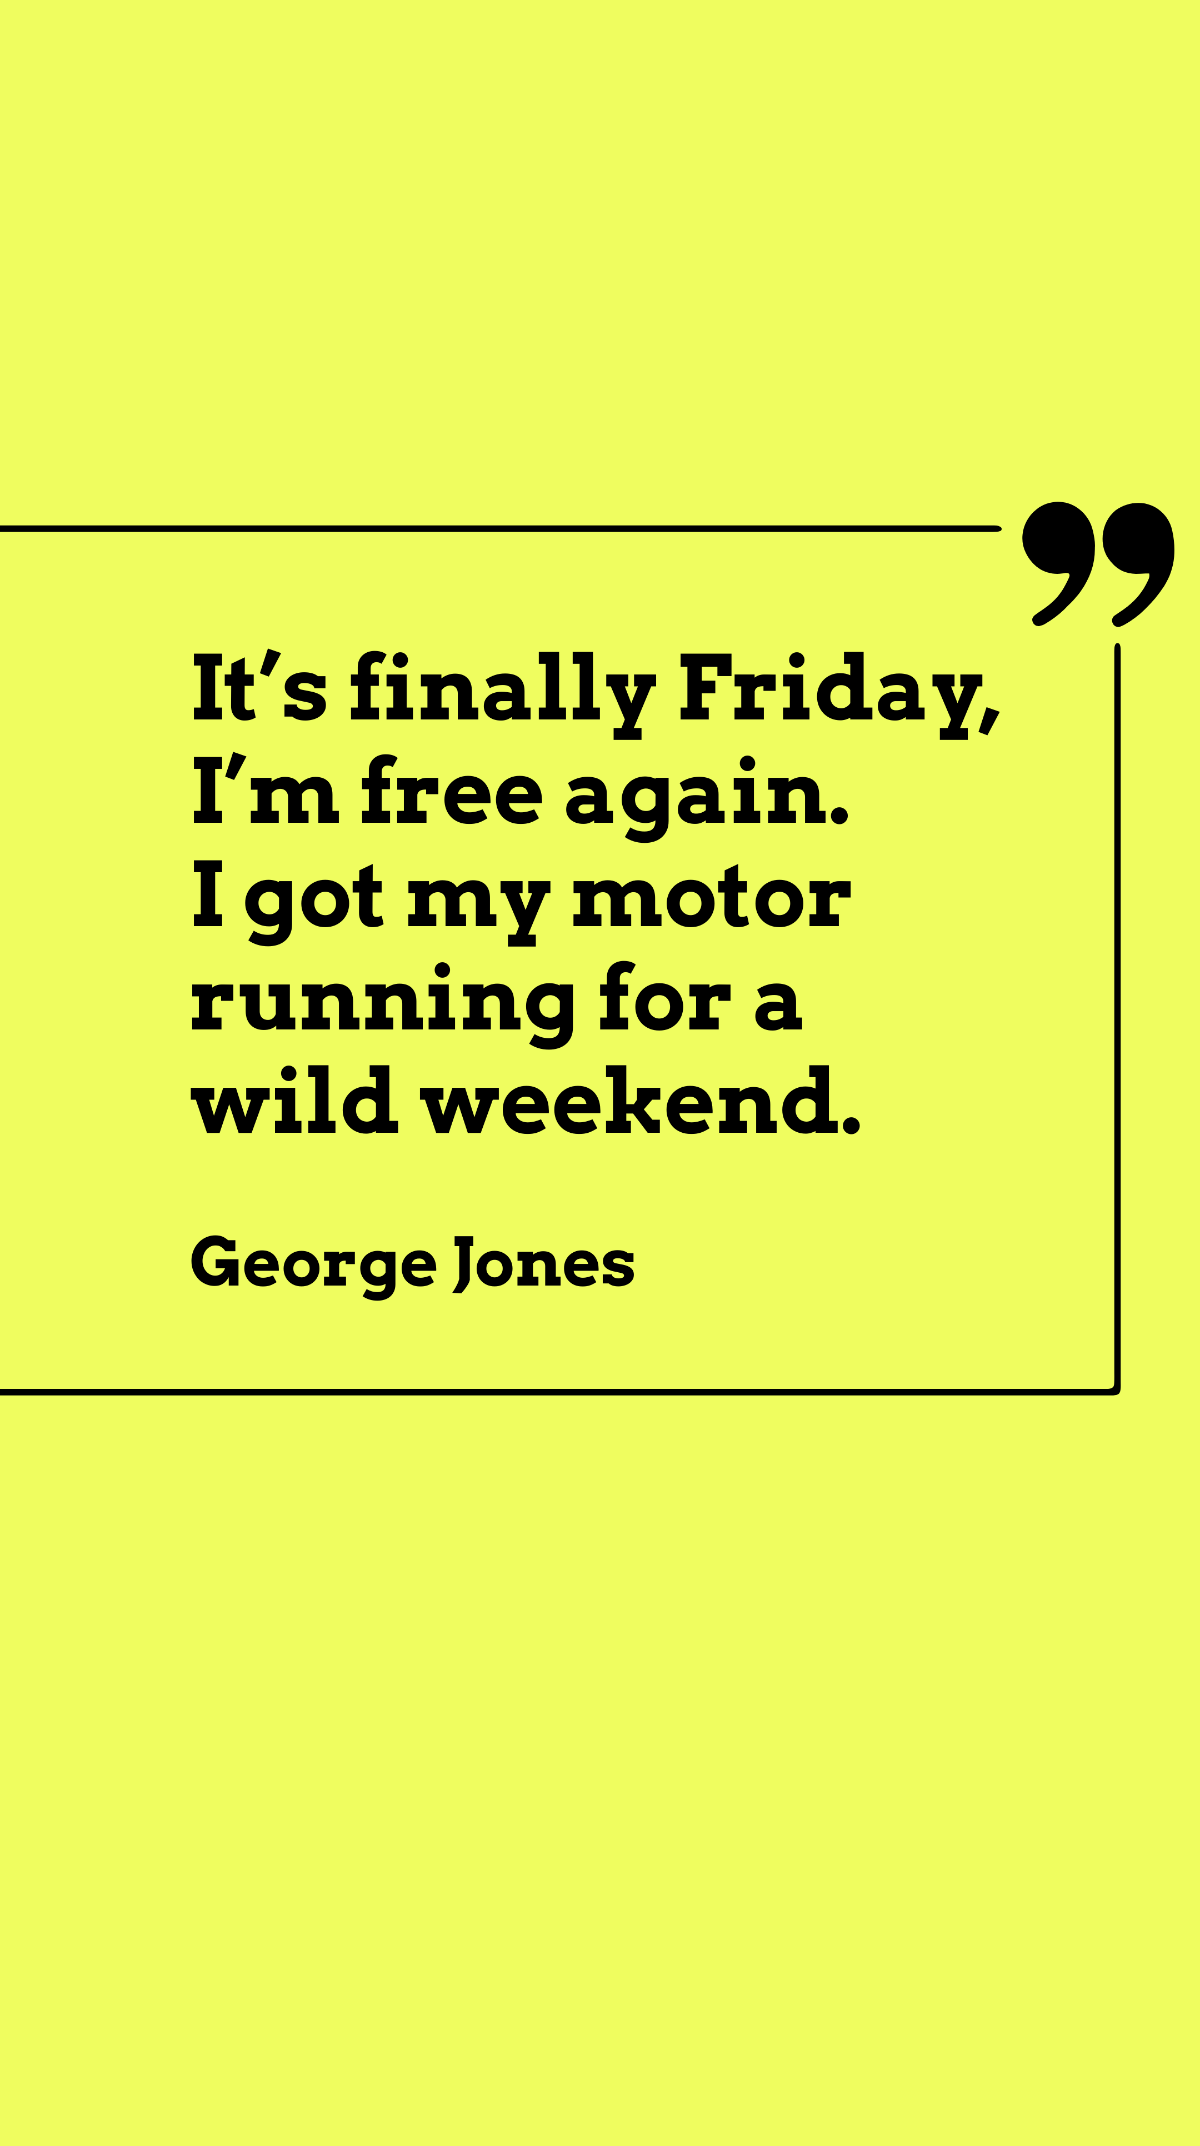 George Jones - It’s finally Friday, I’m again. I got my motor running for a wild weekend. Template